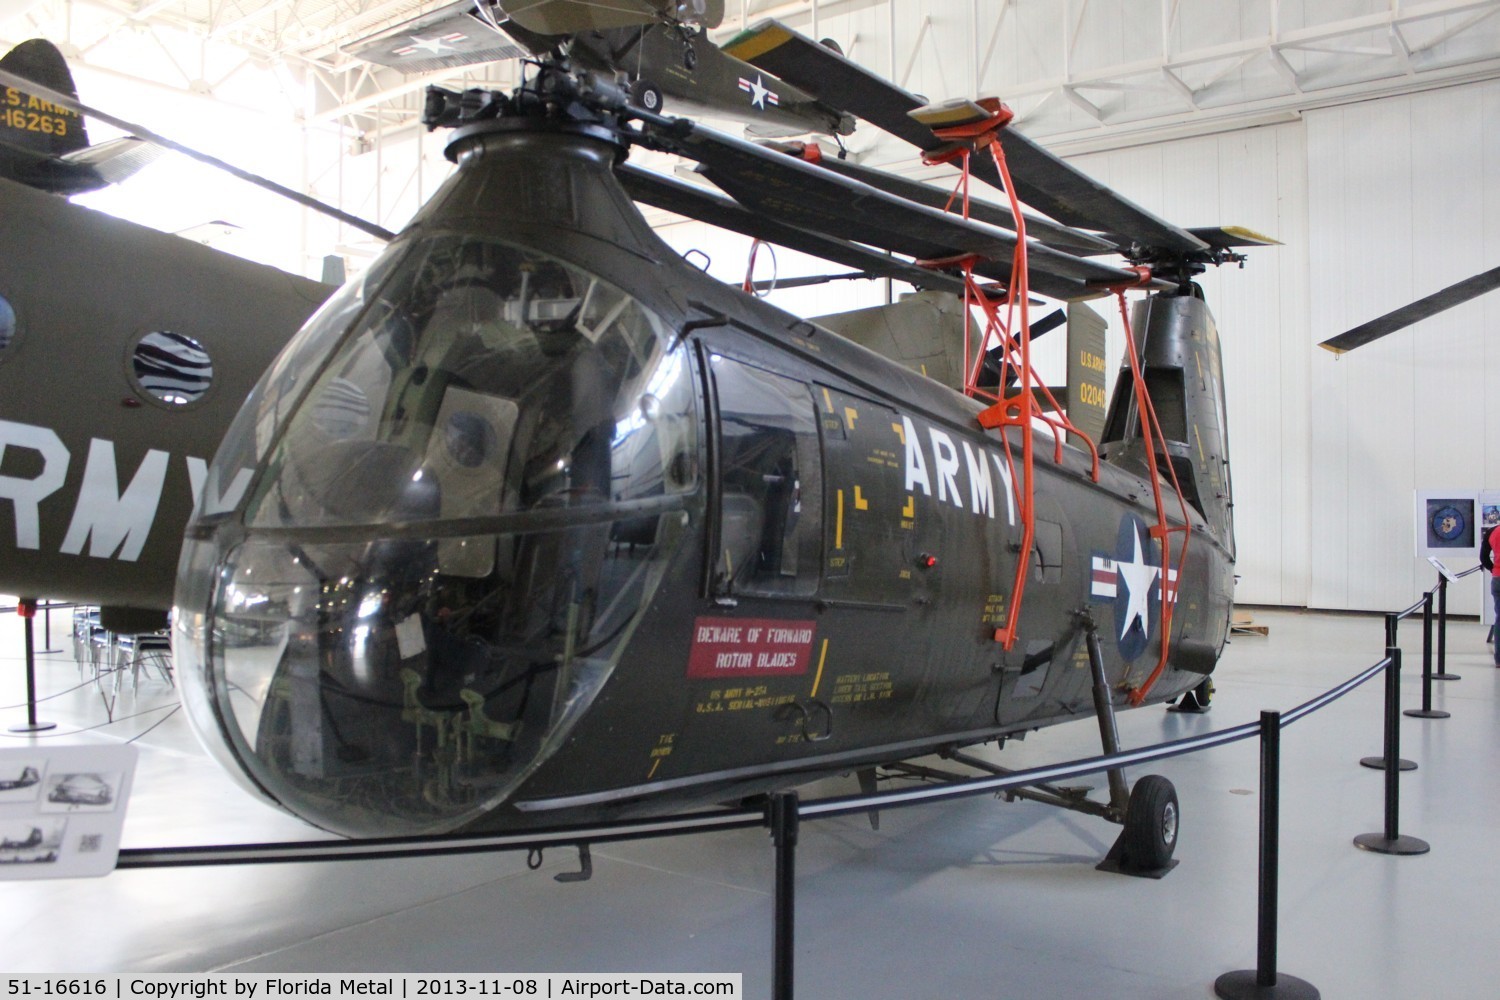 51-16616, 1953 Piasecki H-25A Army Mule C/N 25, H-25 Army Mule at Army Aviation Museum